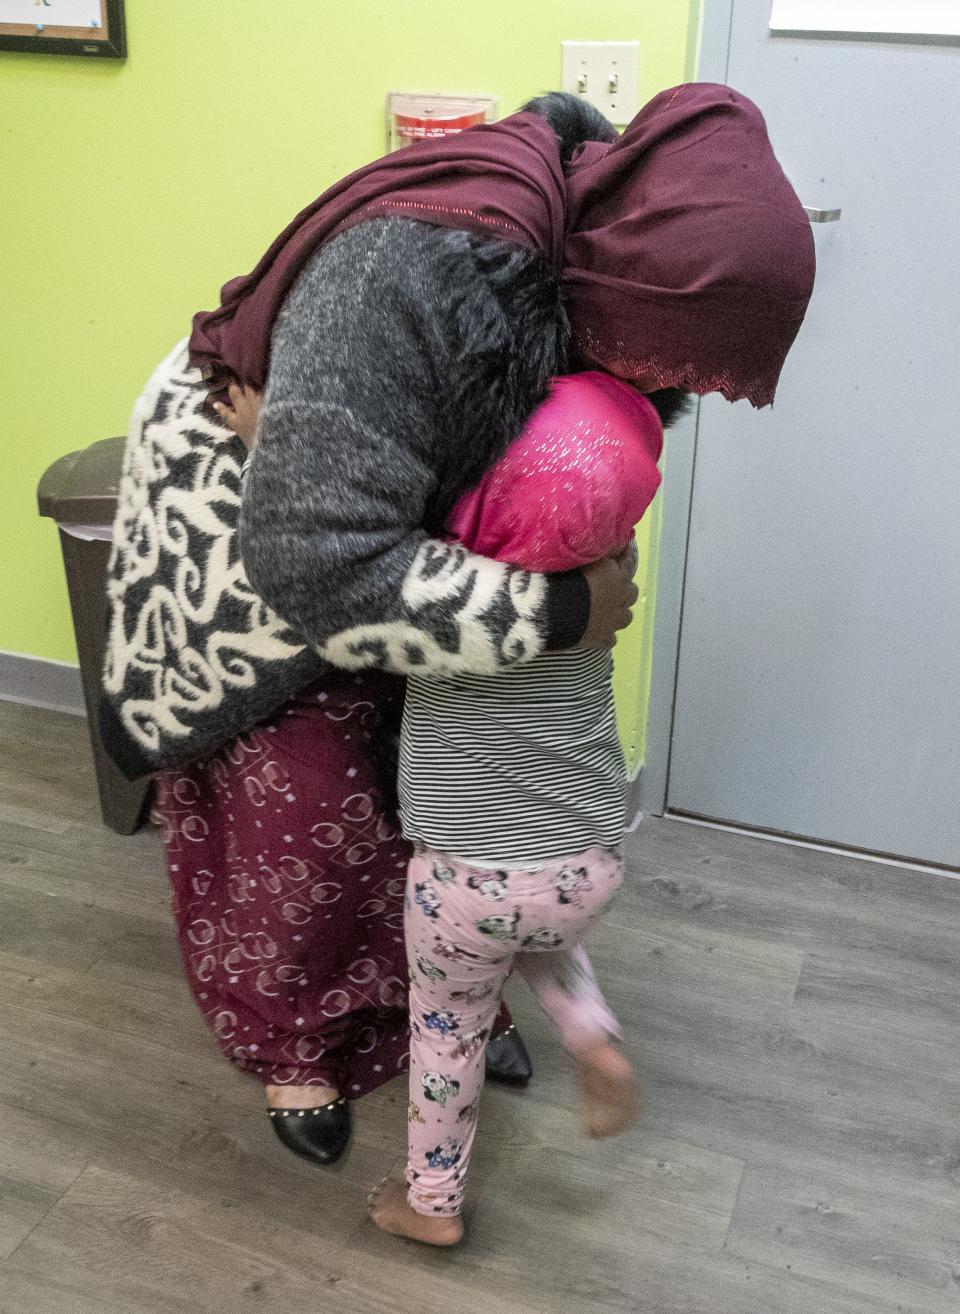 Hinda Abdullahi hugs her daughter before going to a second part of a child care class at Family and Child Care Resources of Northeast Wisconsin in Green Bay.